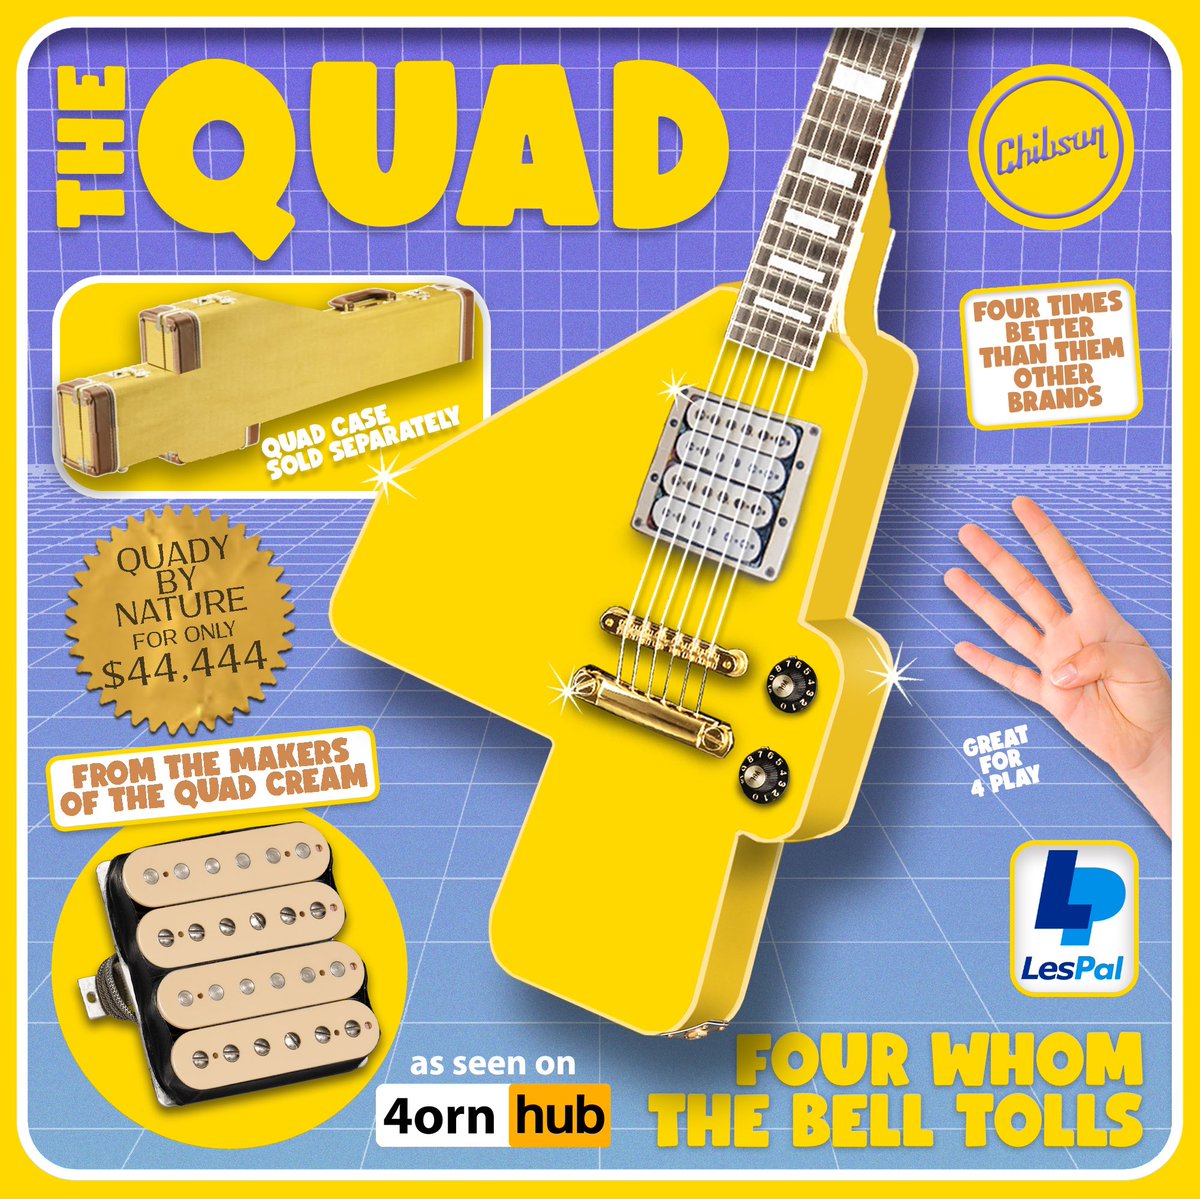 Quad Gave Rock N Roll To You

#chibson #chib #thequad #quad #four #guitar #number #gear #guitarist